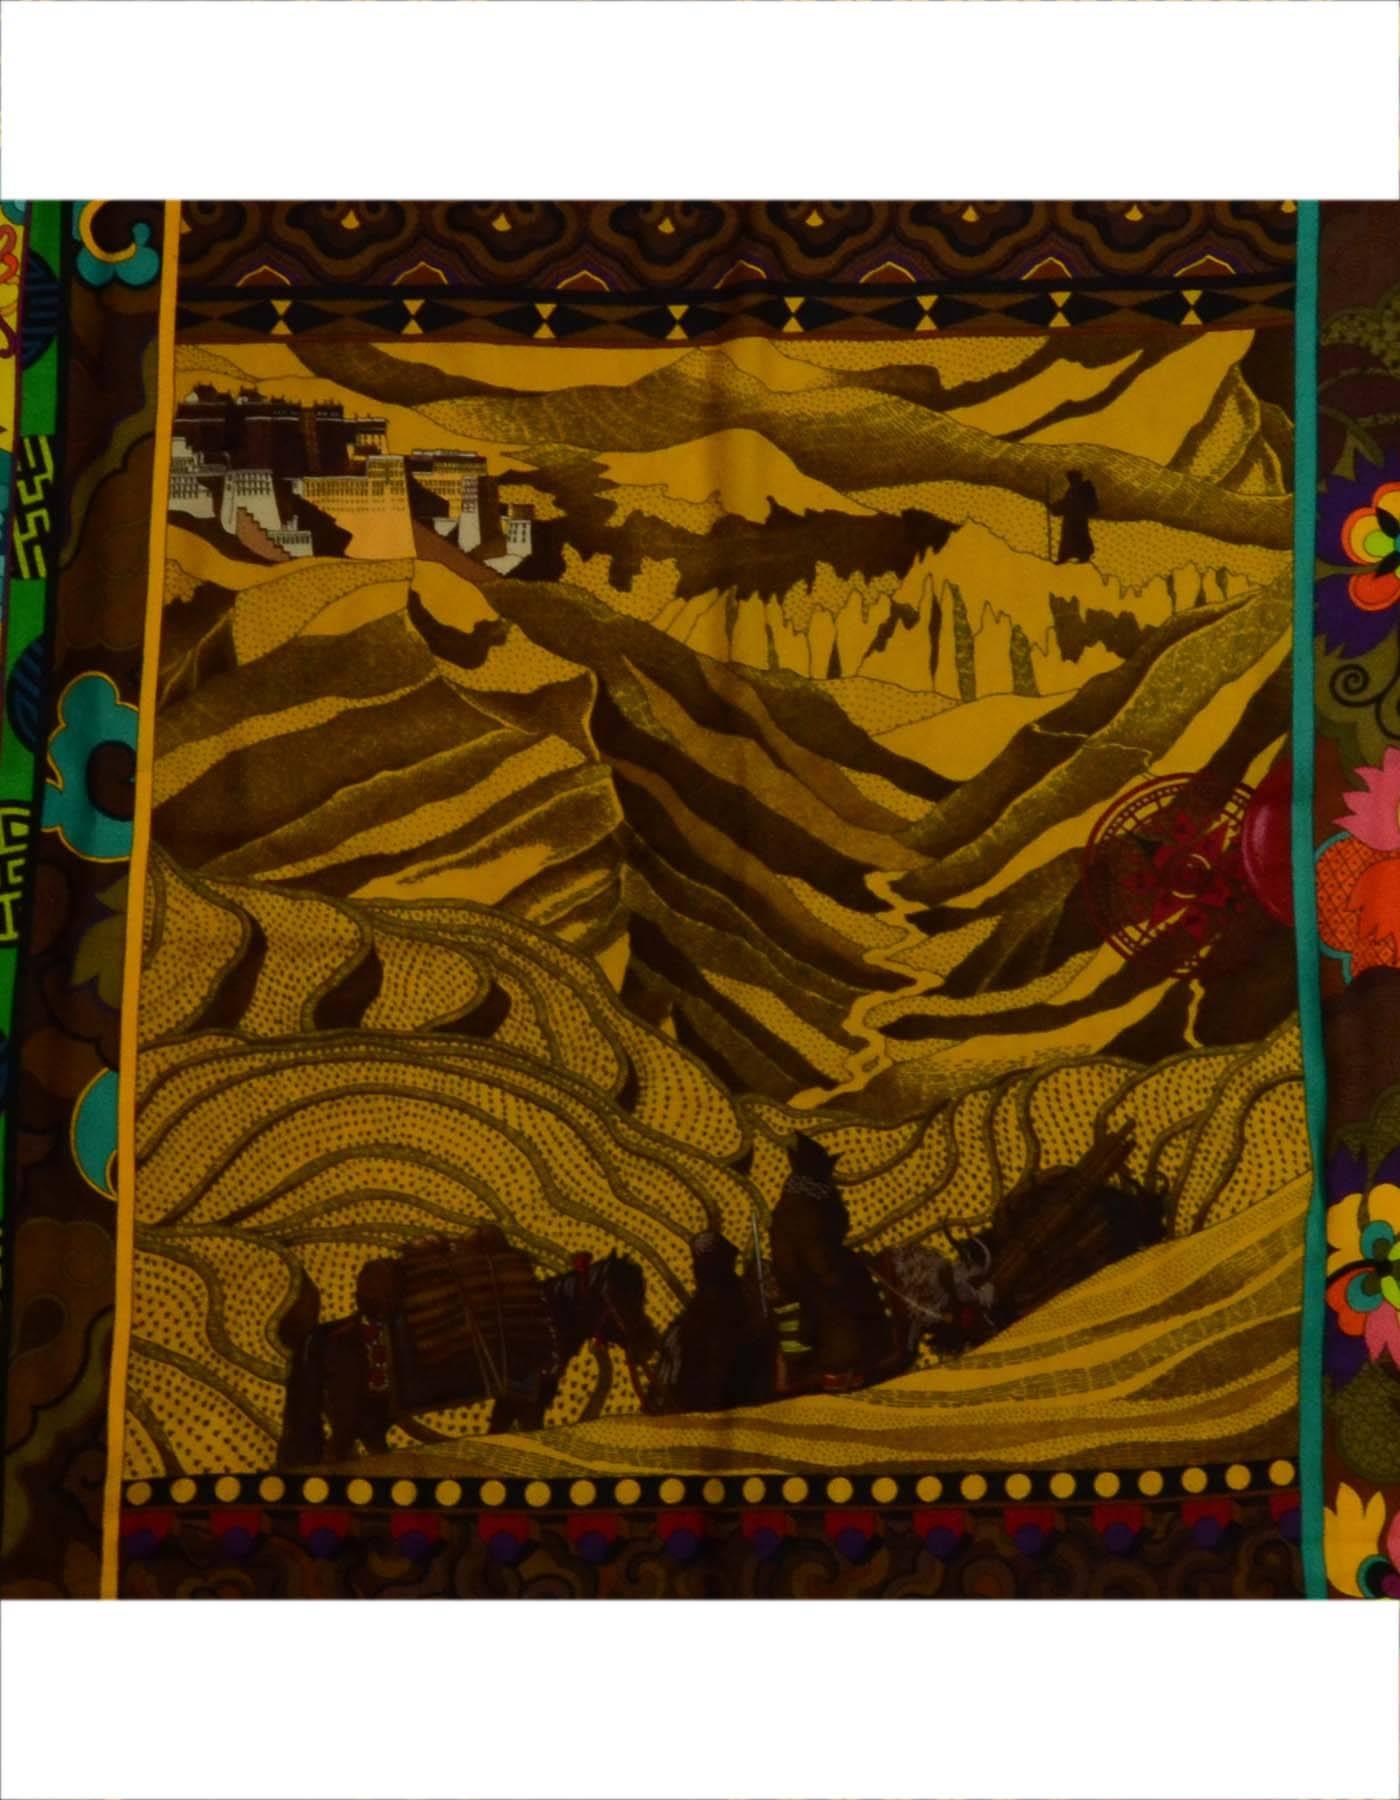 Hermes Black & Gold La Femme Aux Semelles De Vent 140cm Scarf
Features countryside scene printed with flowers and animal print framing it
Made In: France
Color: Black, gold, red, green, yellow, turquoise, purple, brown and black
Composition: 65%